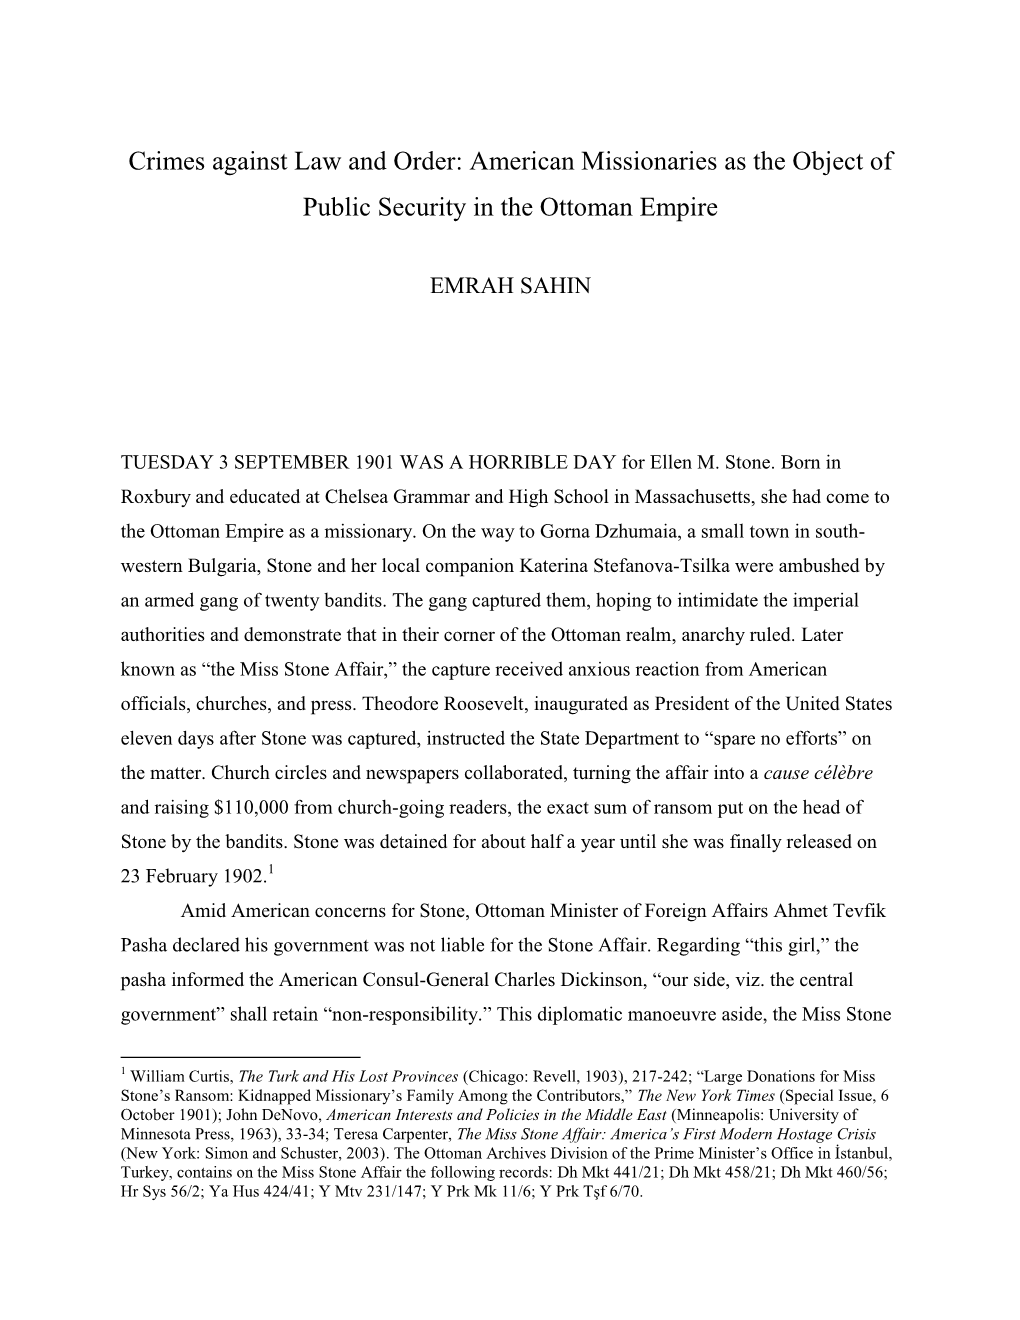 Crimes Against Law and Order: American Missionaries As the Object of Public Security in the Ottoman Empire